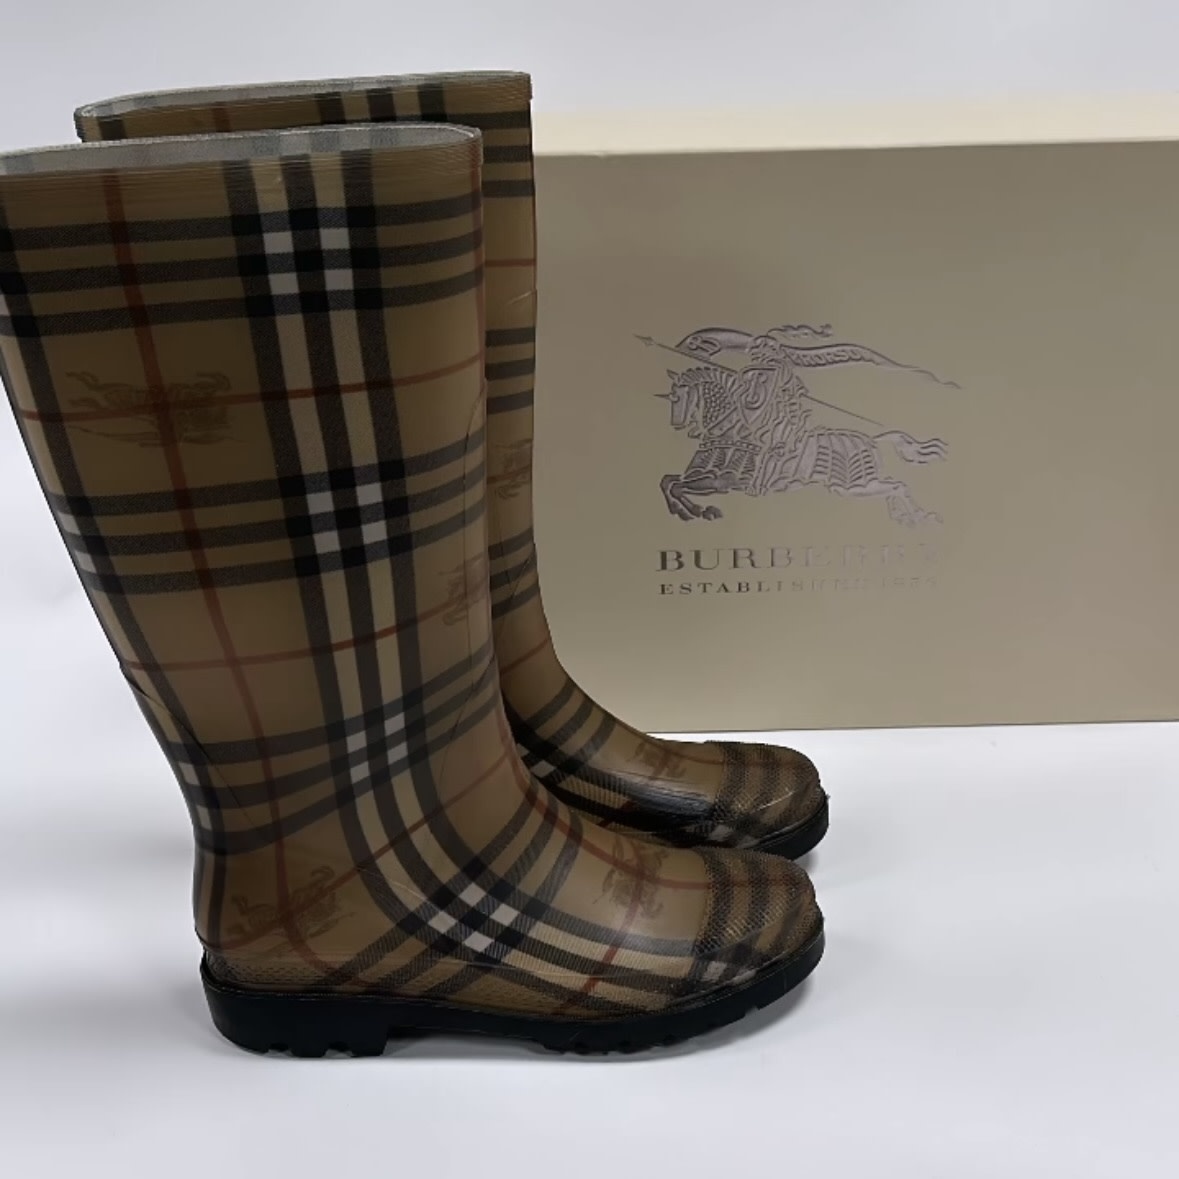 Burberry Boots  Burberry boots, Burberry rain boots, Rain boot outfit